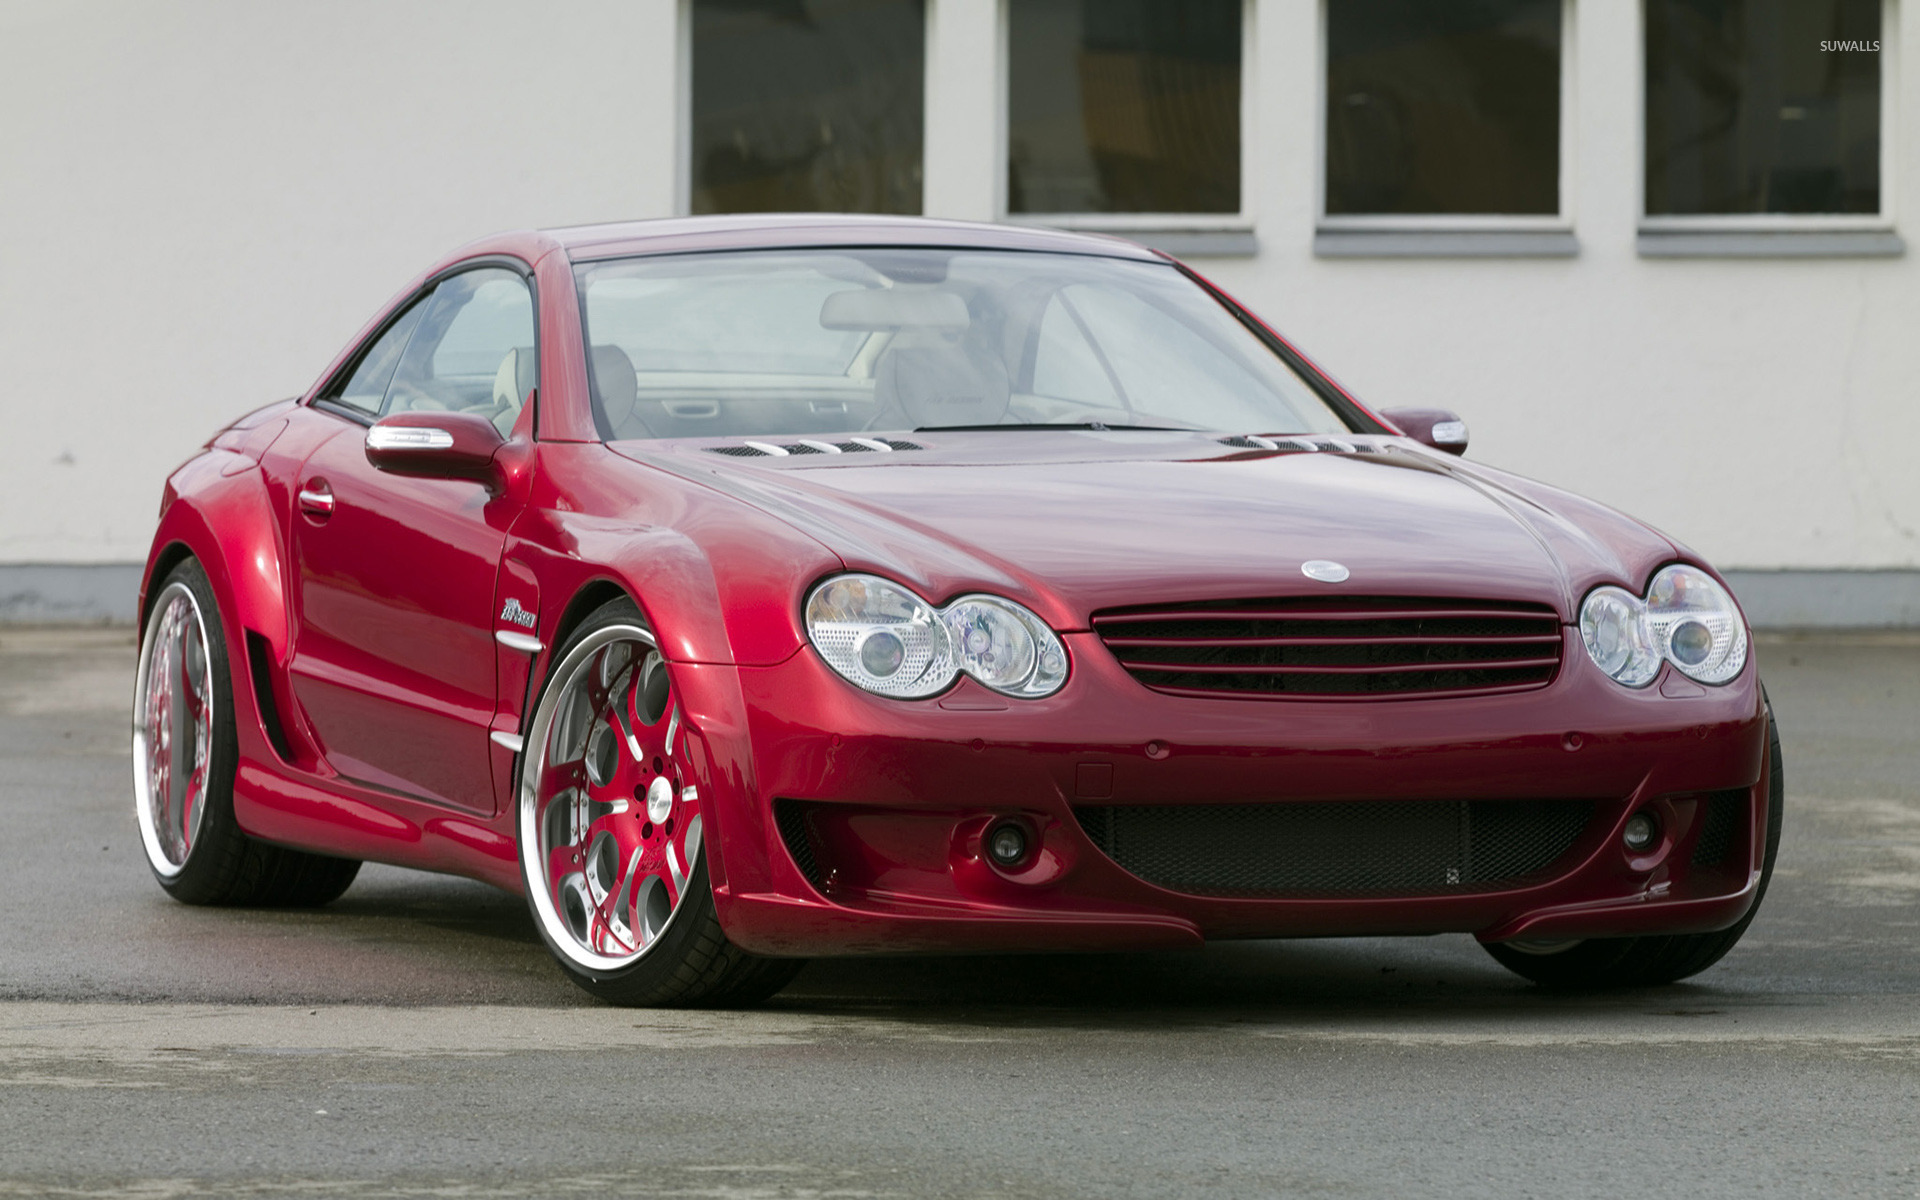 Red Mercedes Benz SL500 parked wallpaper   Car wallpapers